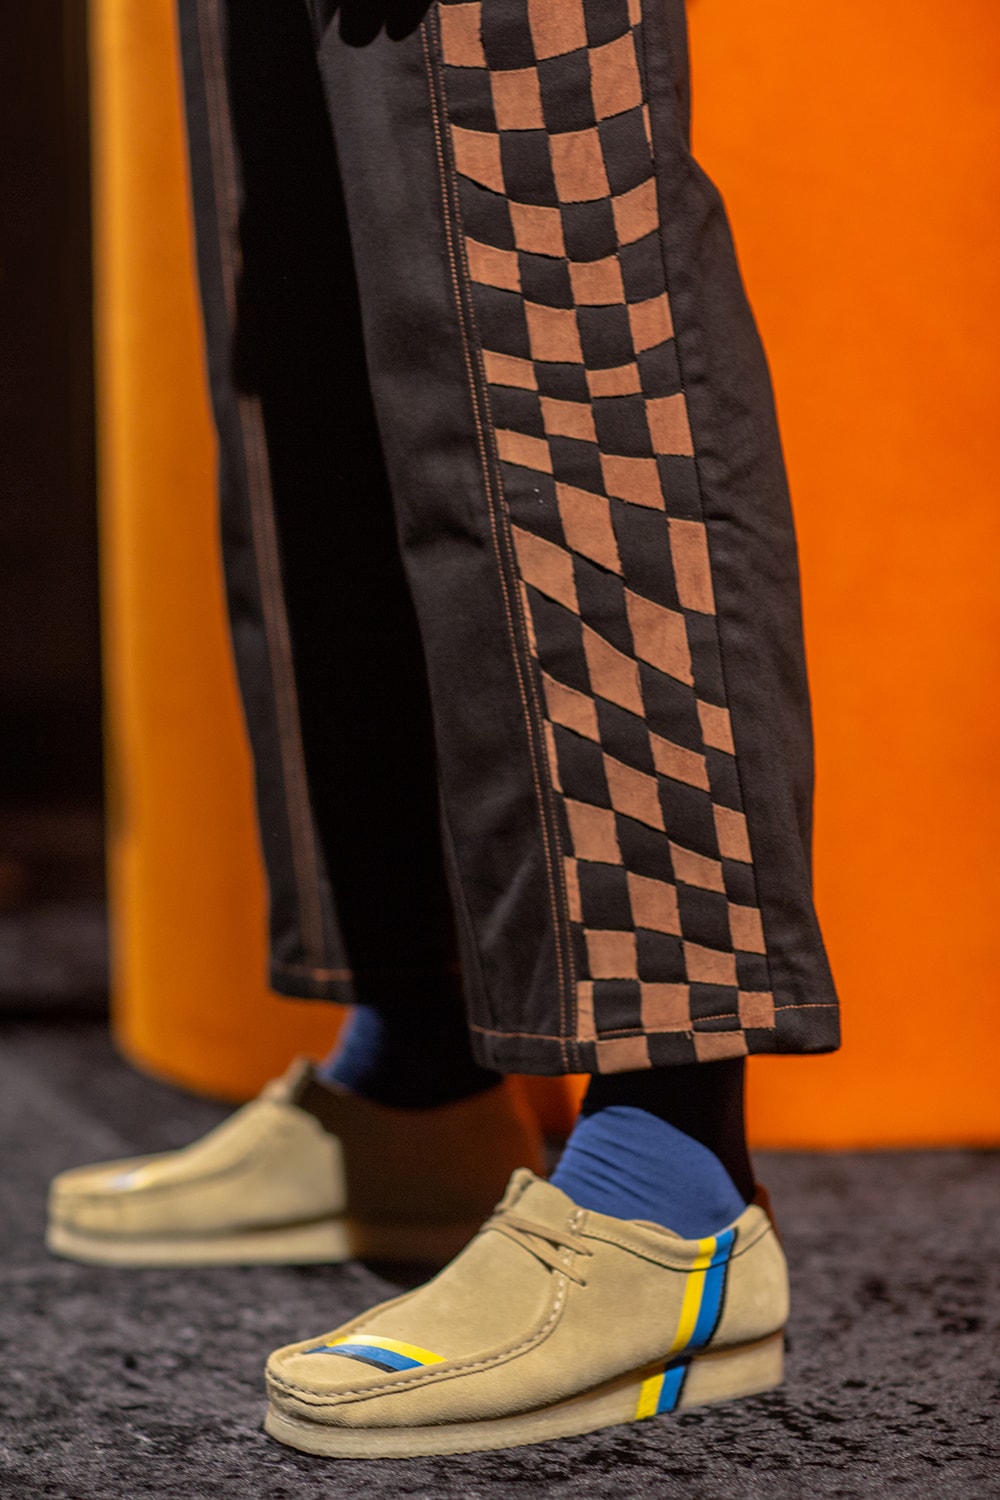 ahluwalia studio priya backstage fall winter 2020 adidas superstar clarks wallabee sustainable 60s 1965 Barbara Brown release information first look collection